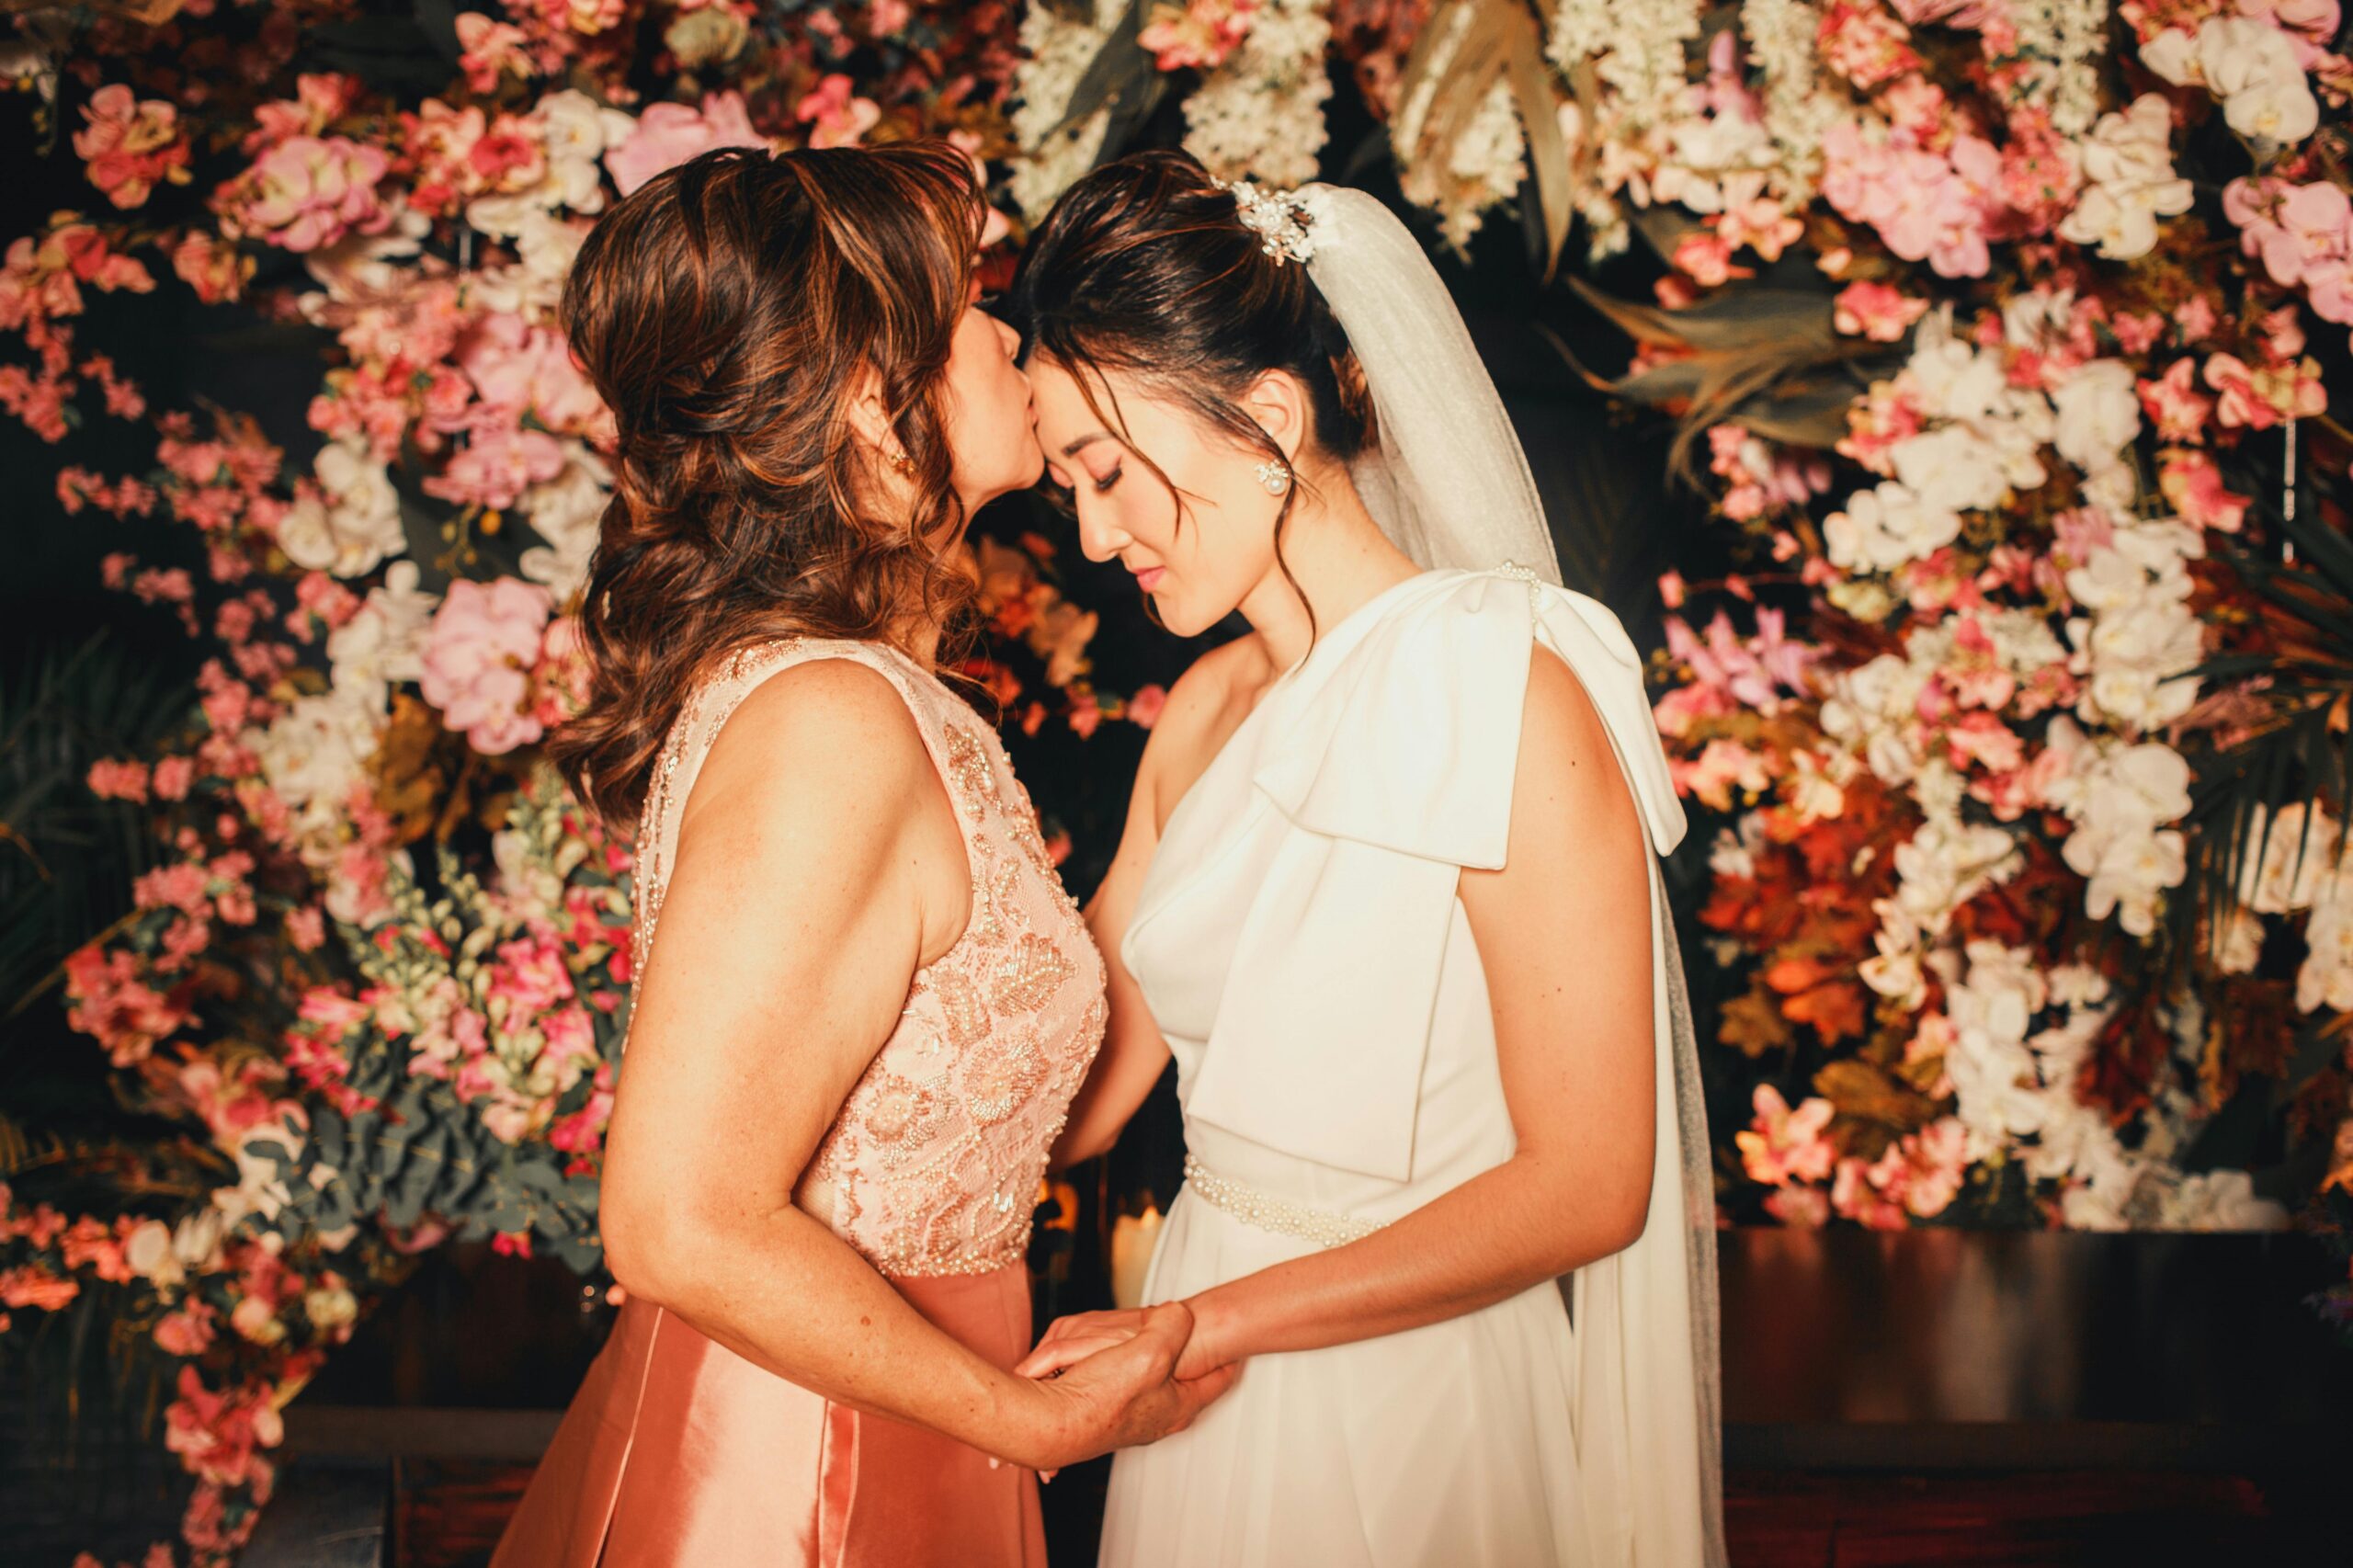 Mother kisses her daughter the bride on the forehead Pexels